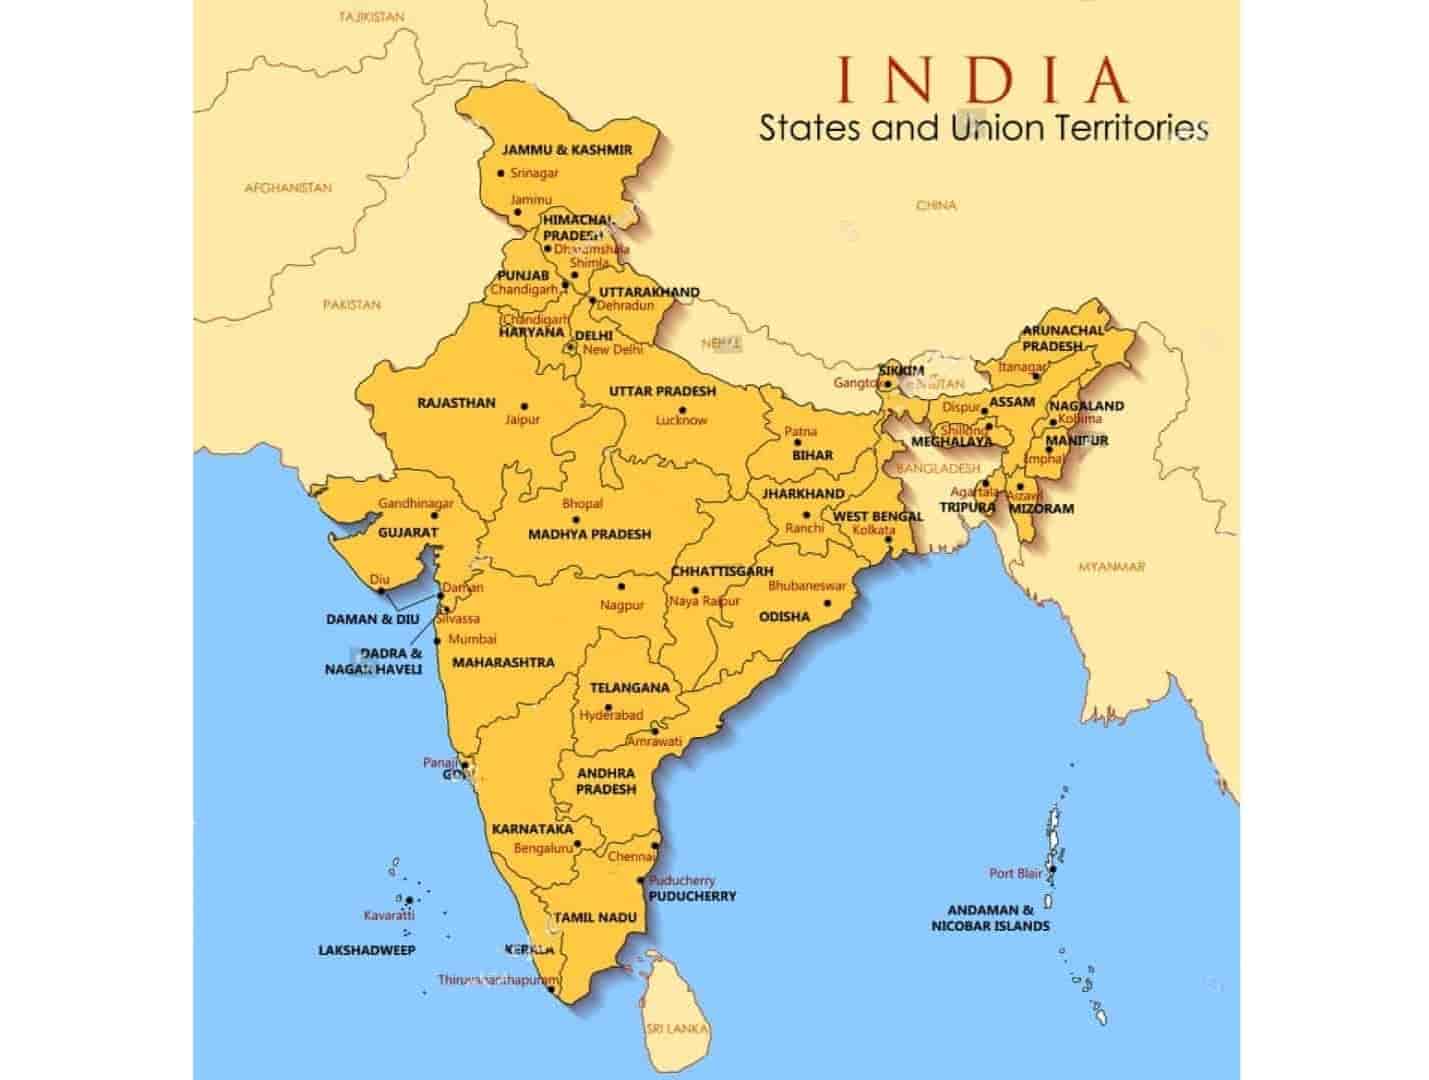 Who created the first map of India